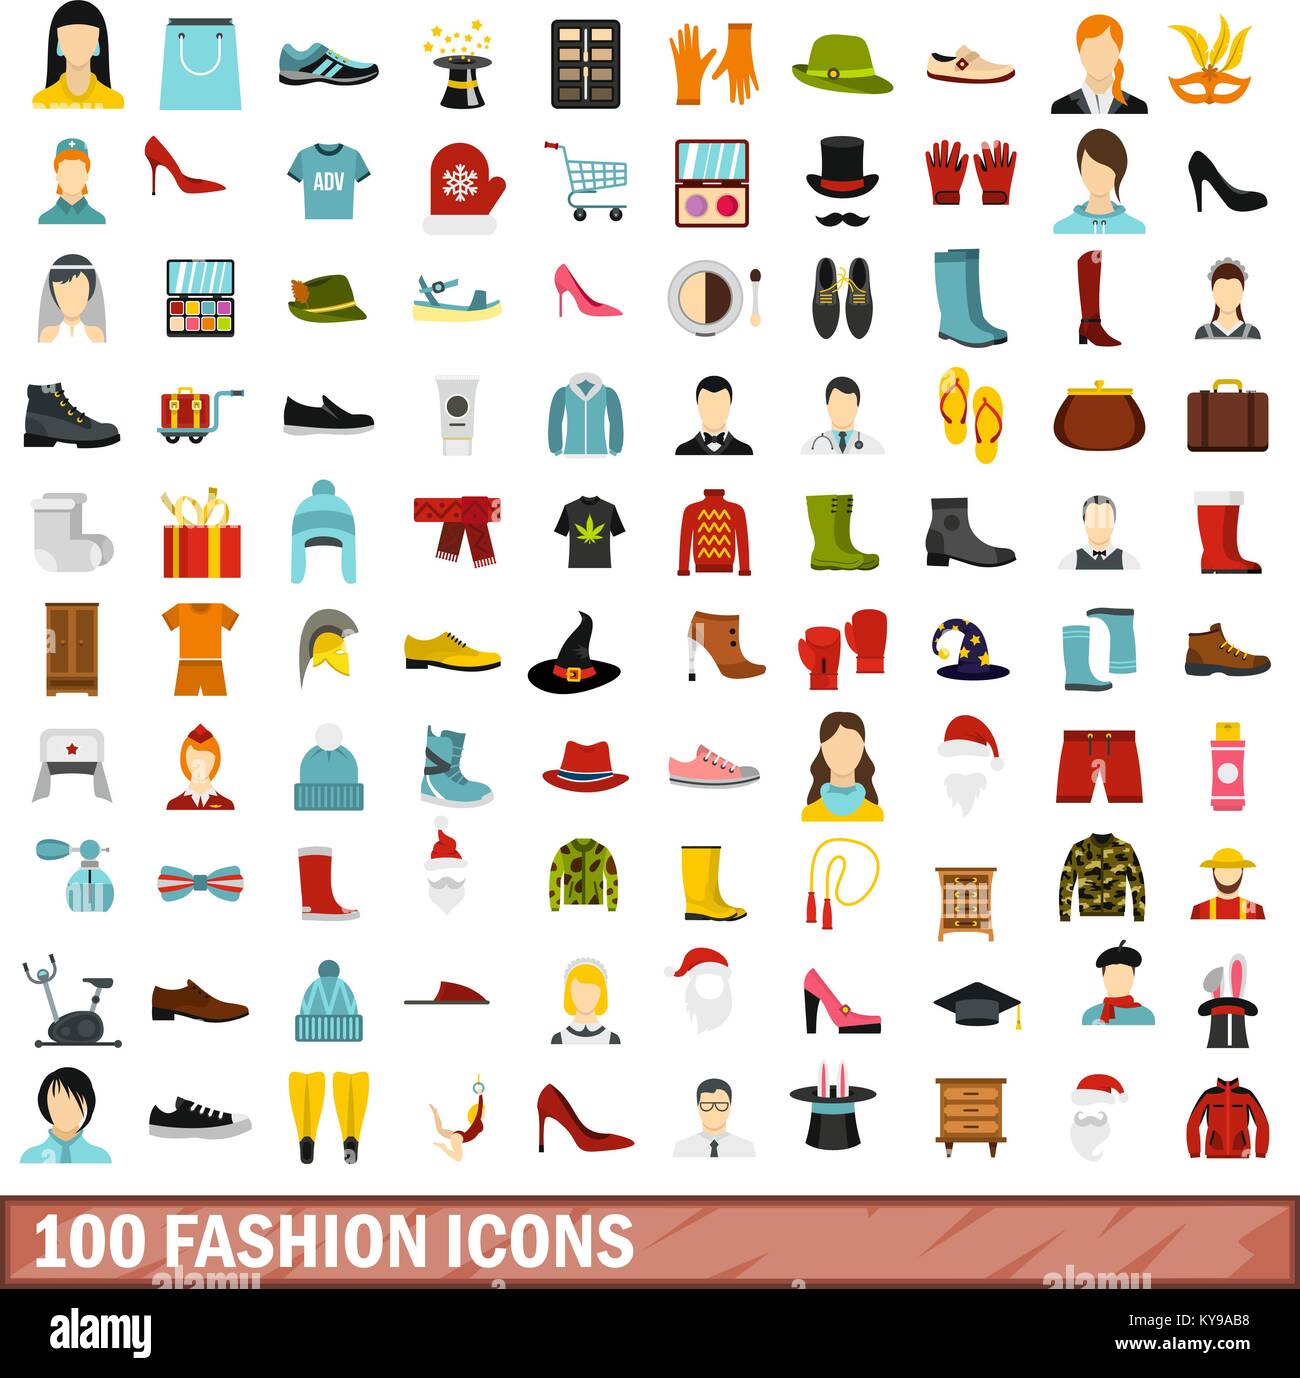 100 fashion icons set in flat style for any design vector illustration Stock Vector